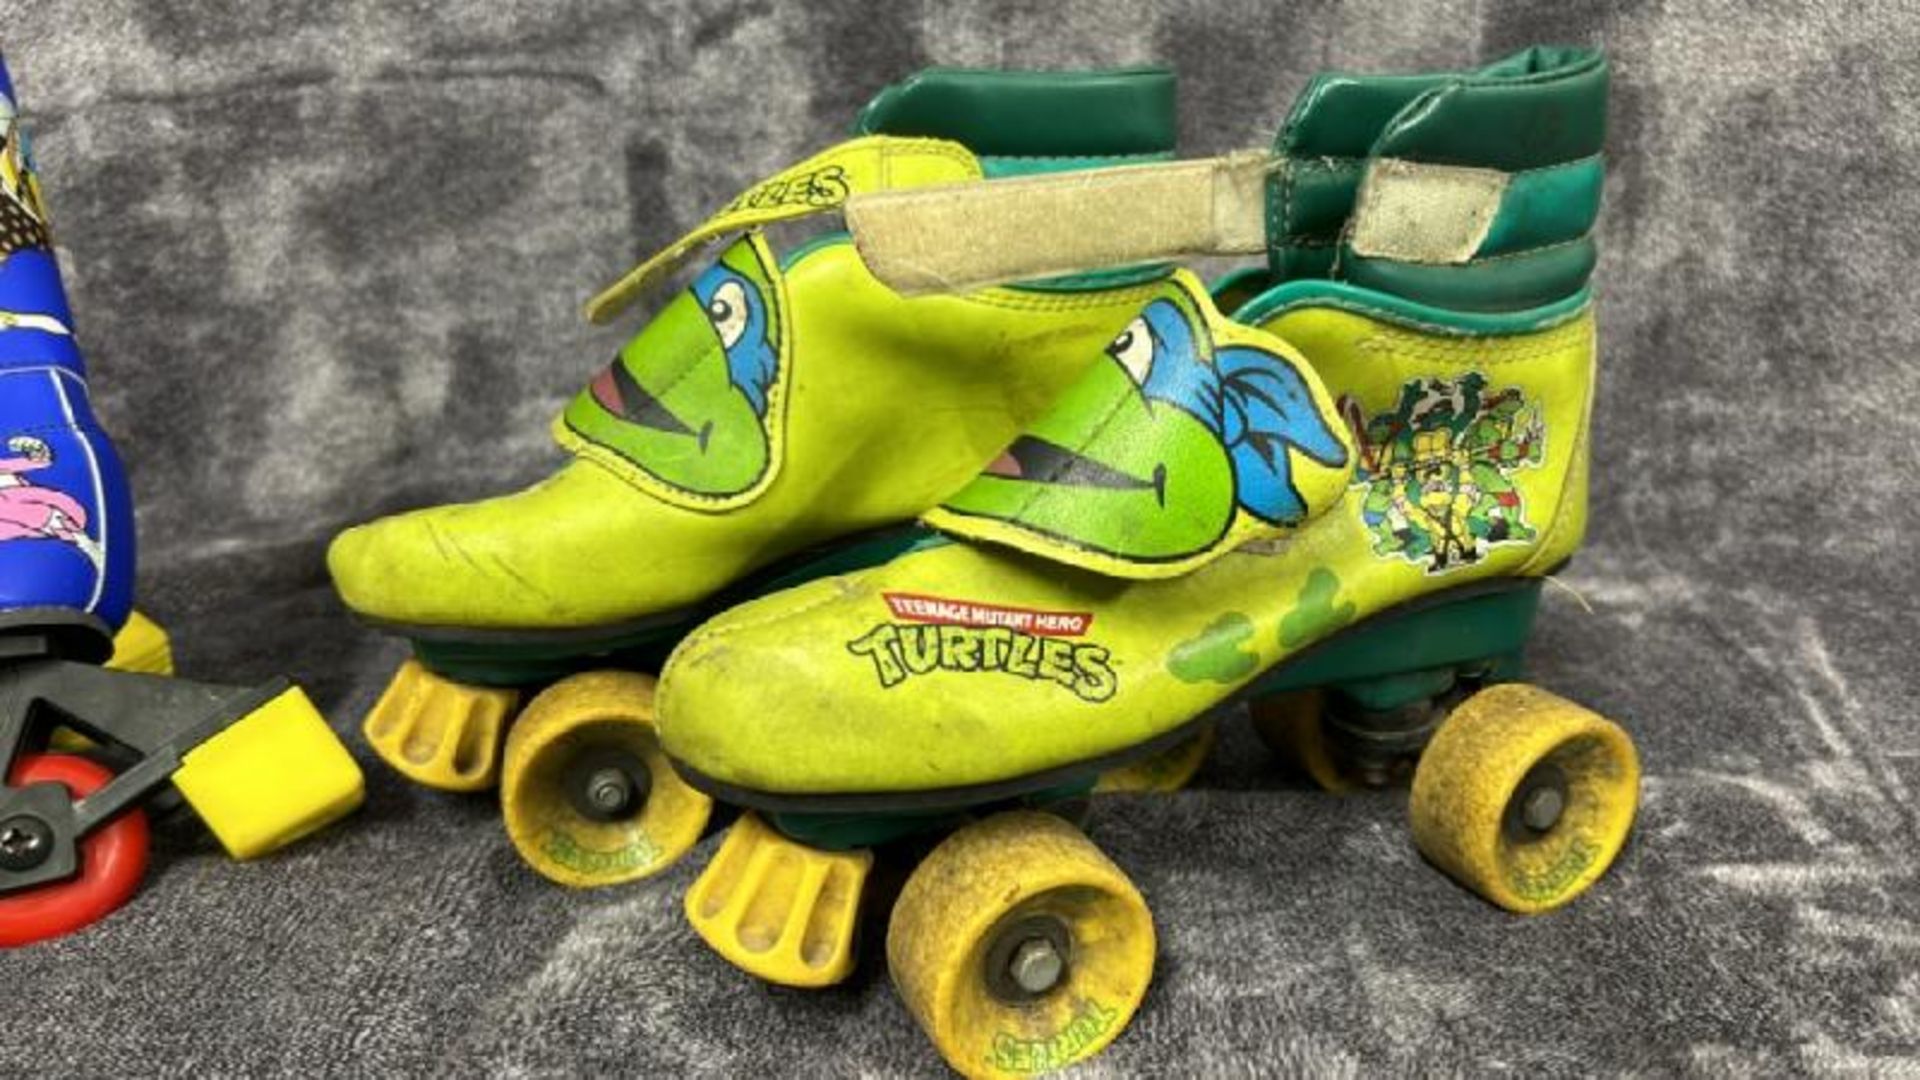 1990 Teenage Mutant Hero Turtles roller boots and Power Rangers roller blades from 1994 / AN43 - Image 2 of 6